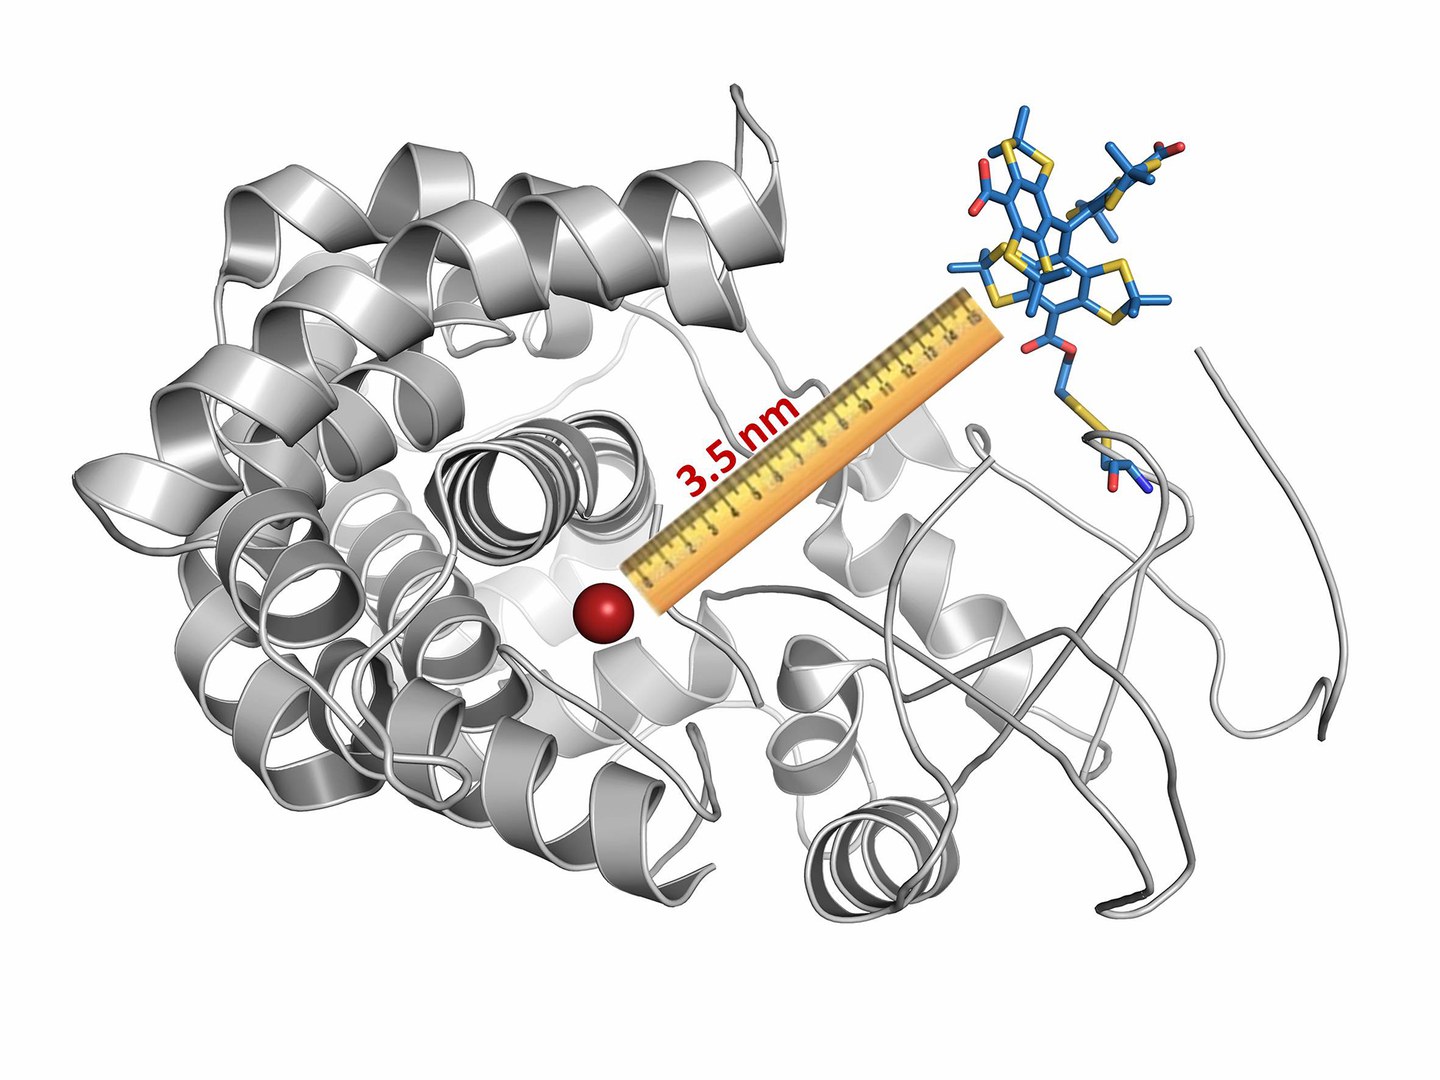 The Bonn-based scientists fitted a cytochrome molecule